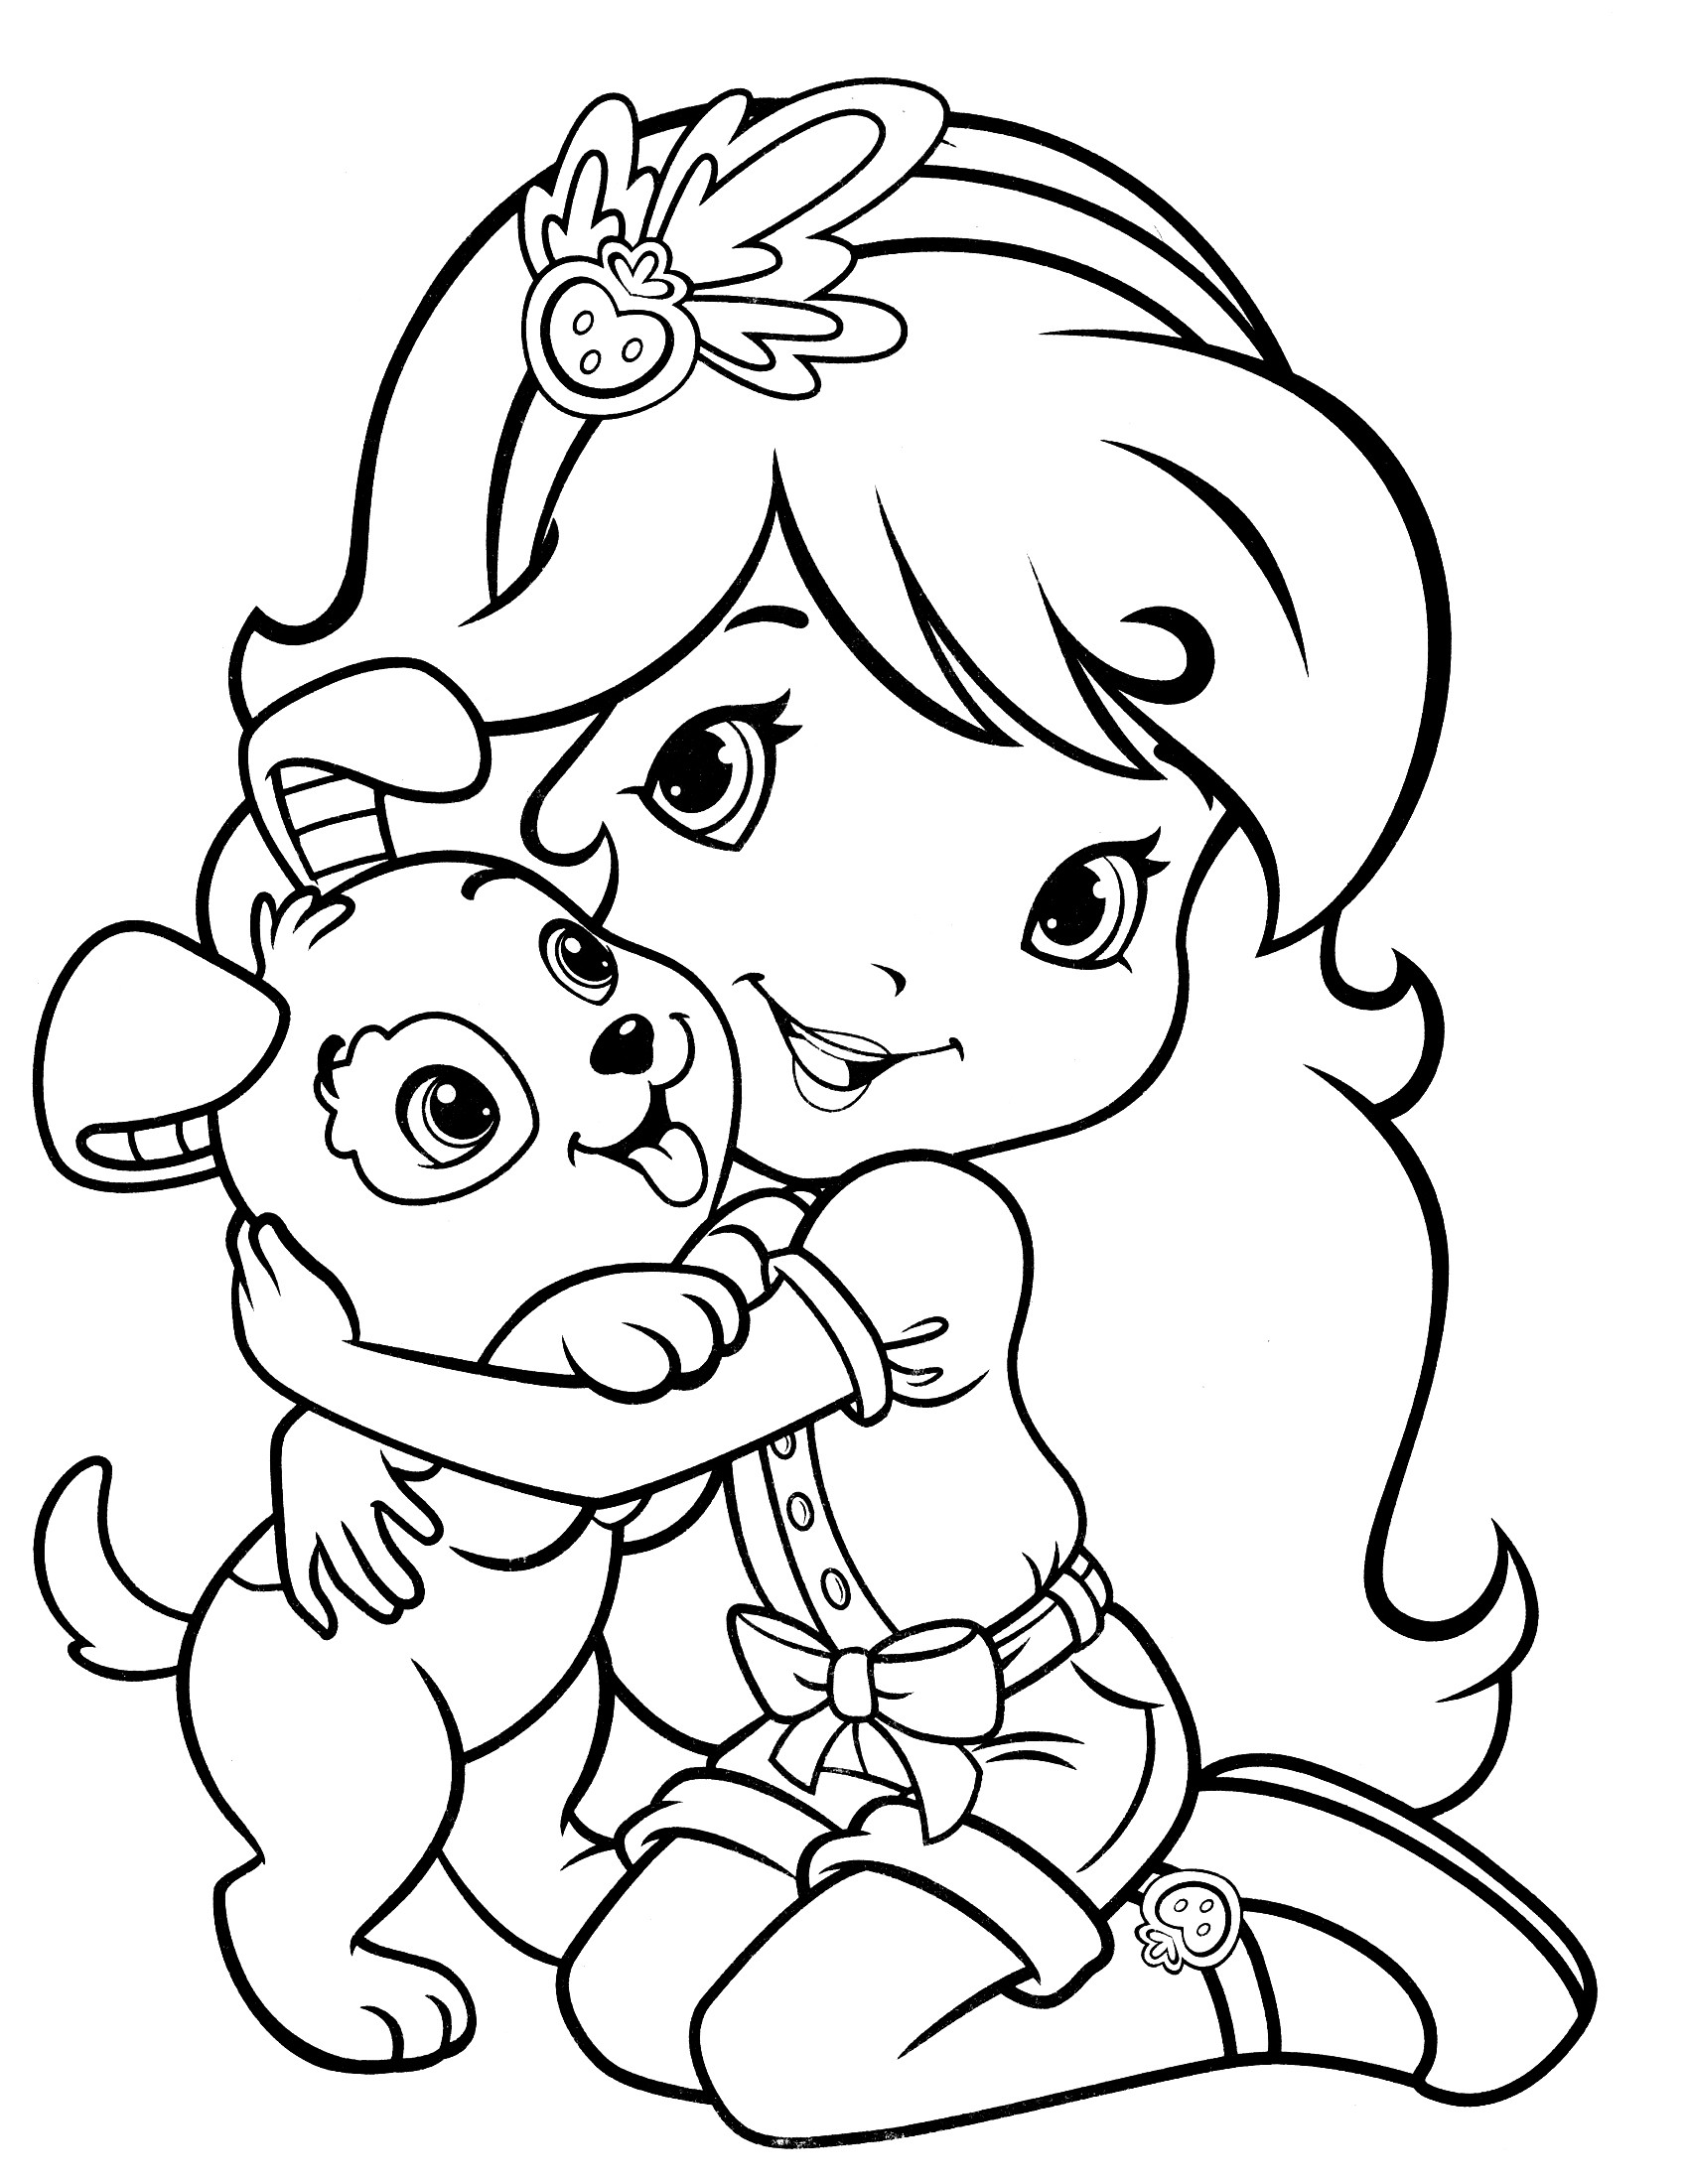 Cool Coloring Sheets For Girls Free
 Strawberry Shortcake Coloring Pages Cool coloring pages